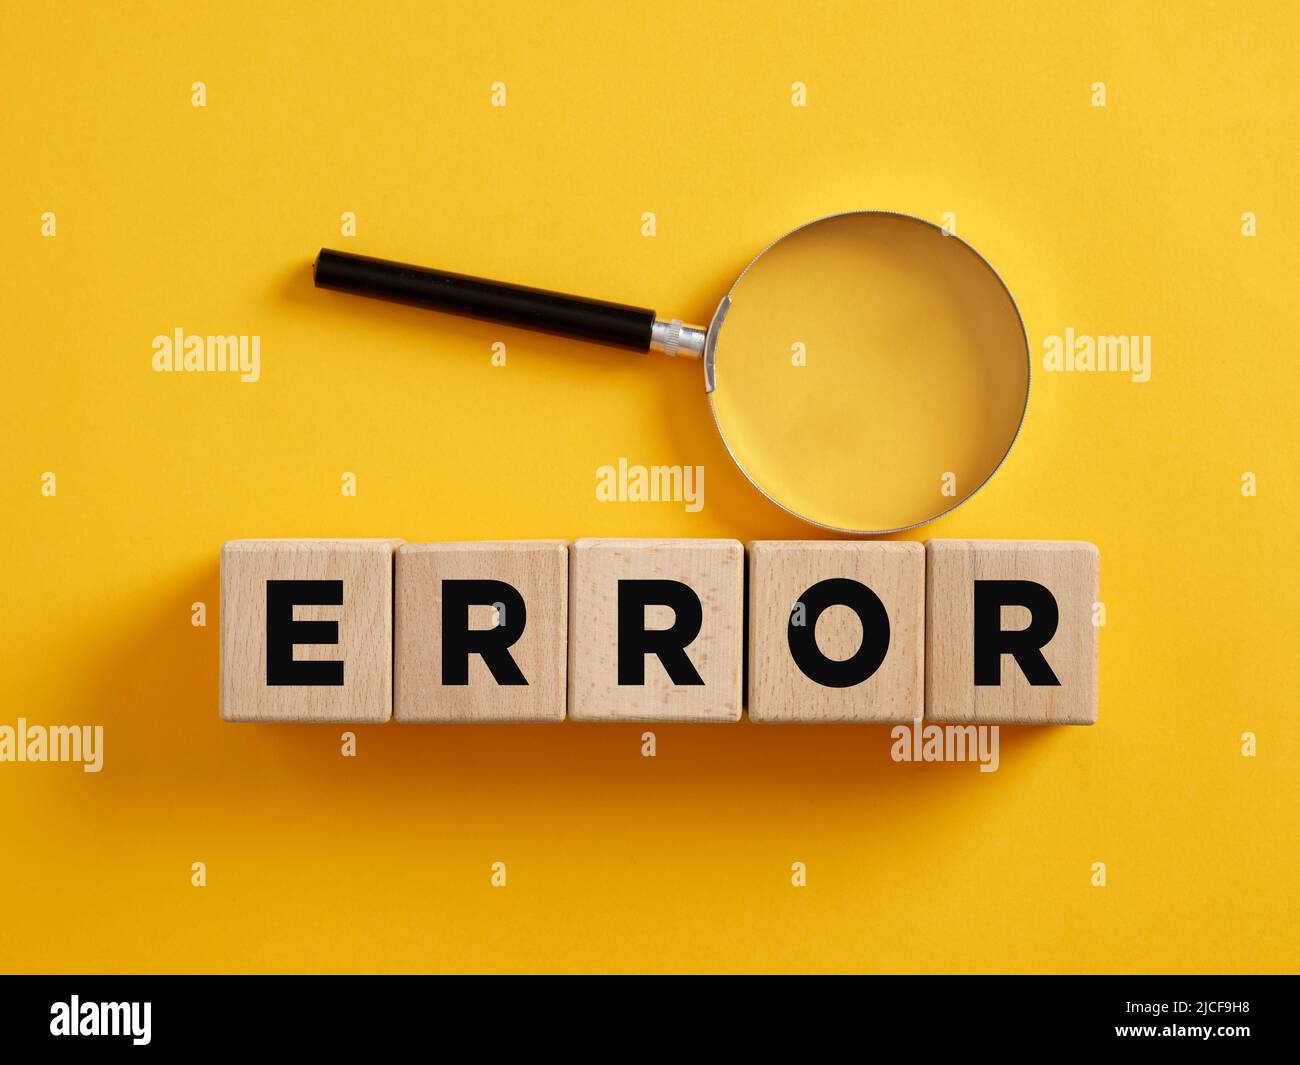 The word error on wooden cubes with a magnifier. To find, reveal or analyze a system error concept. Stock Photo